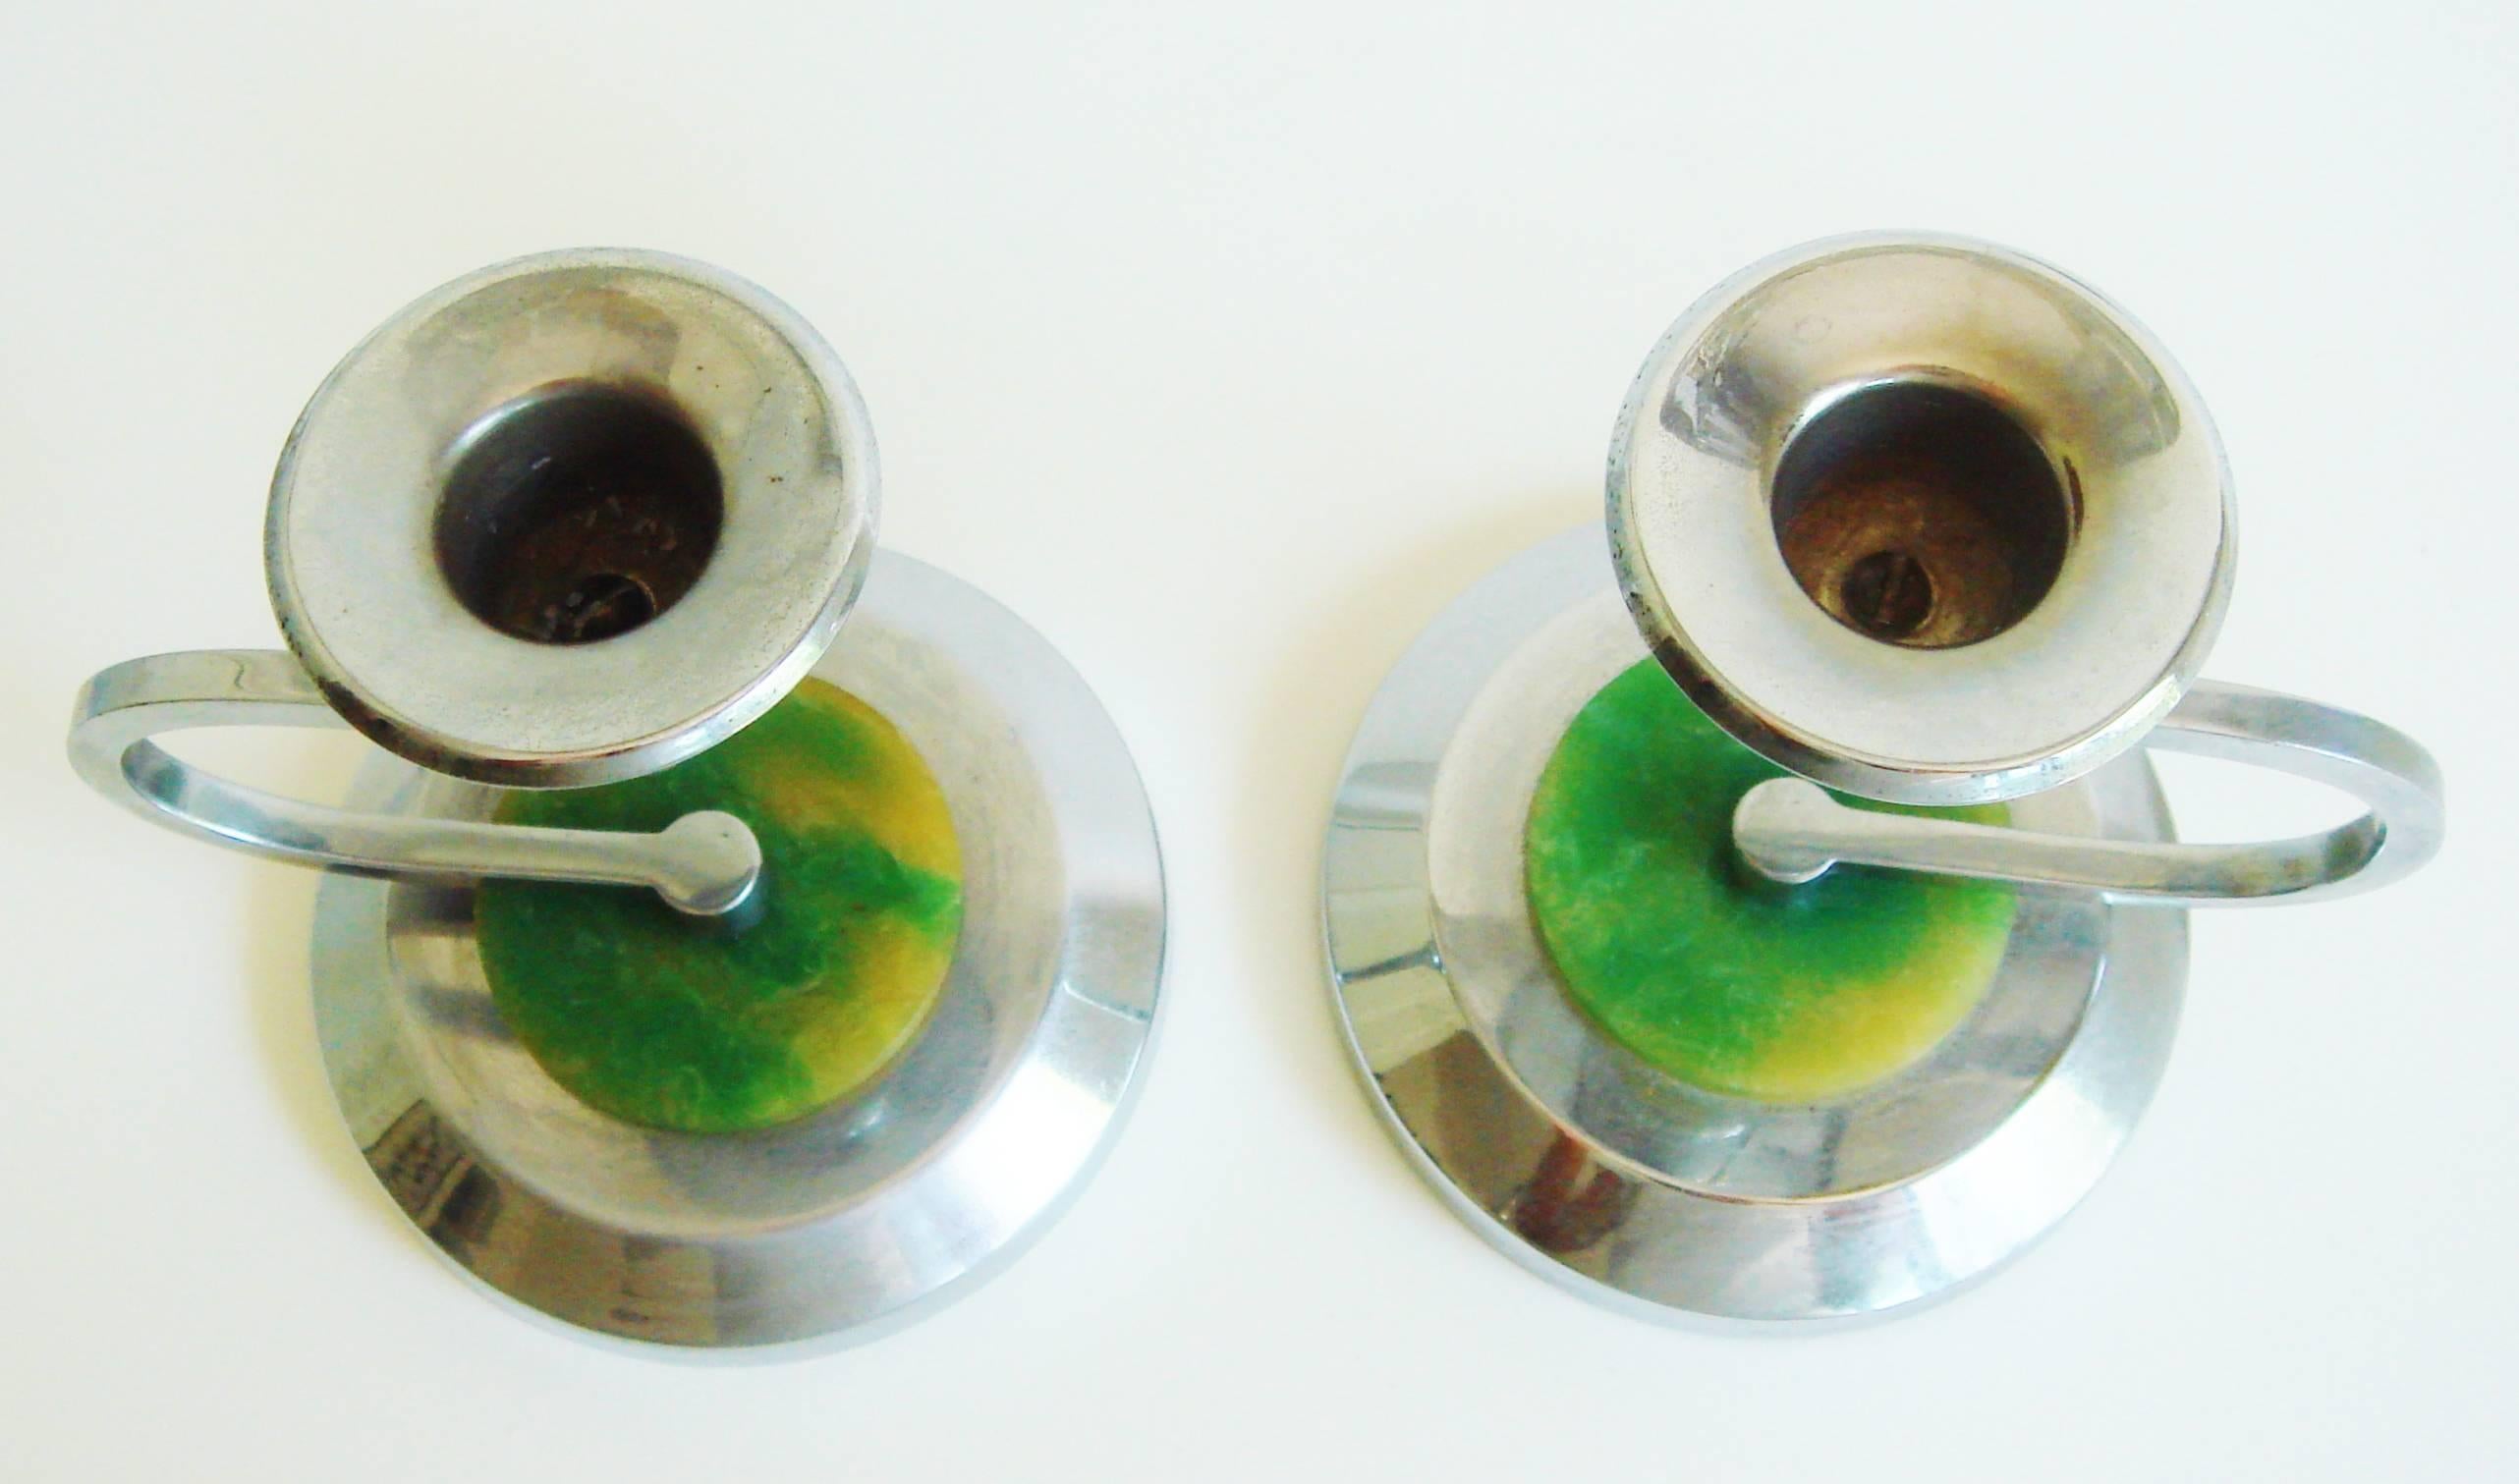 Molded Pair of English Art Deco Chrome Candlesticks with Black & Green Bakelite Accents